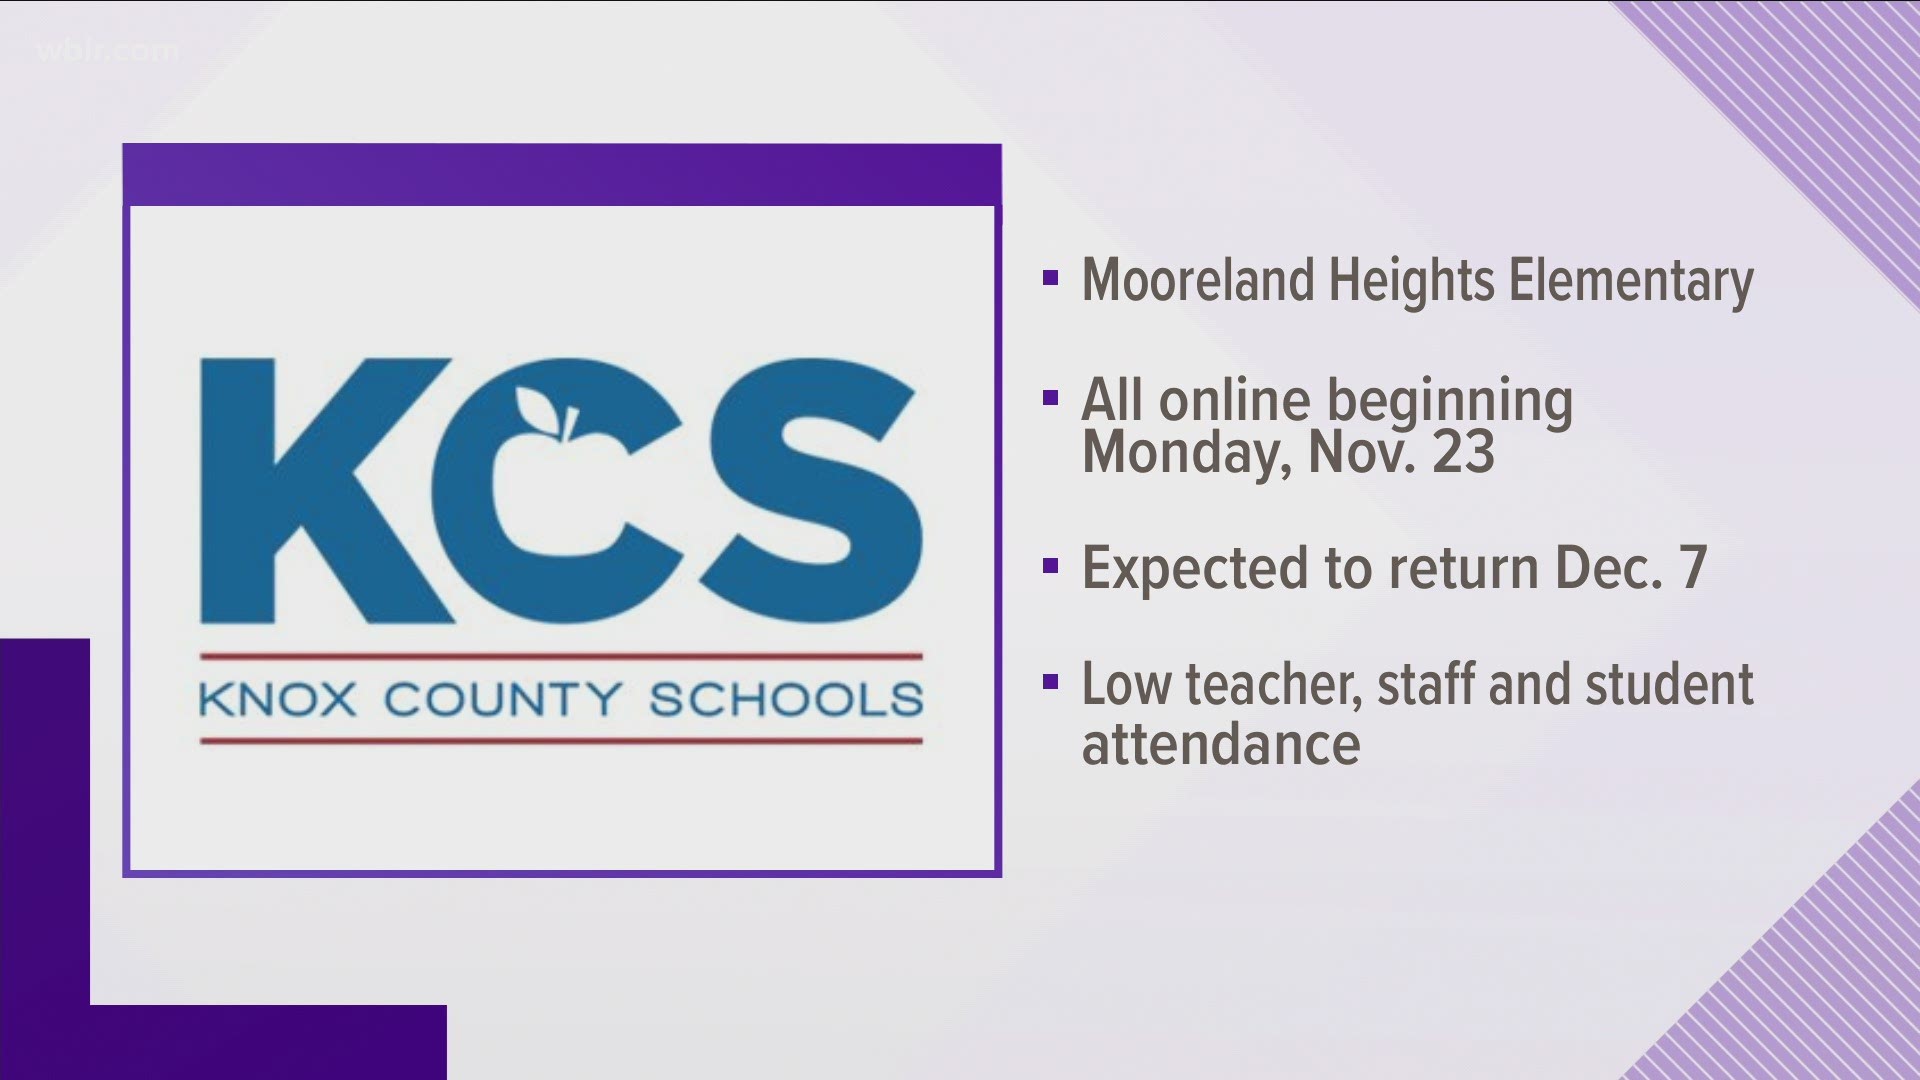 Mooreland Heights Elementary in Knox County will also move to online learning Monday. This will last for 7 school days.